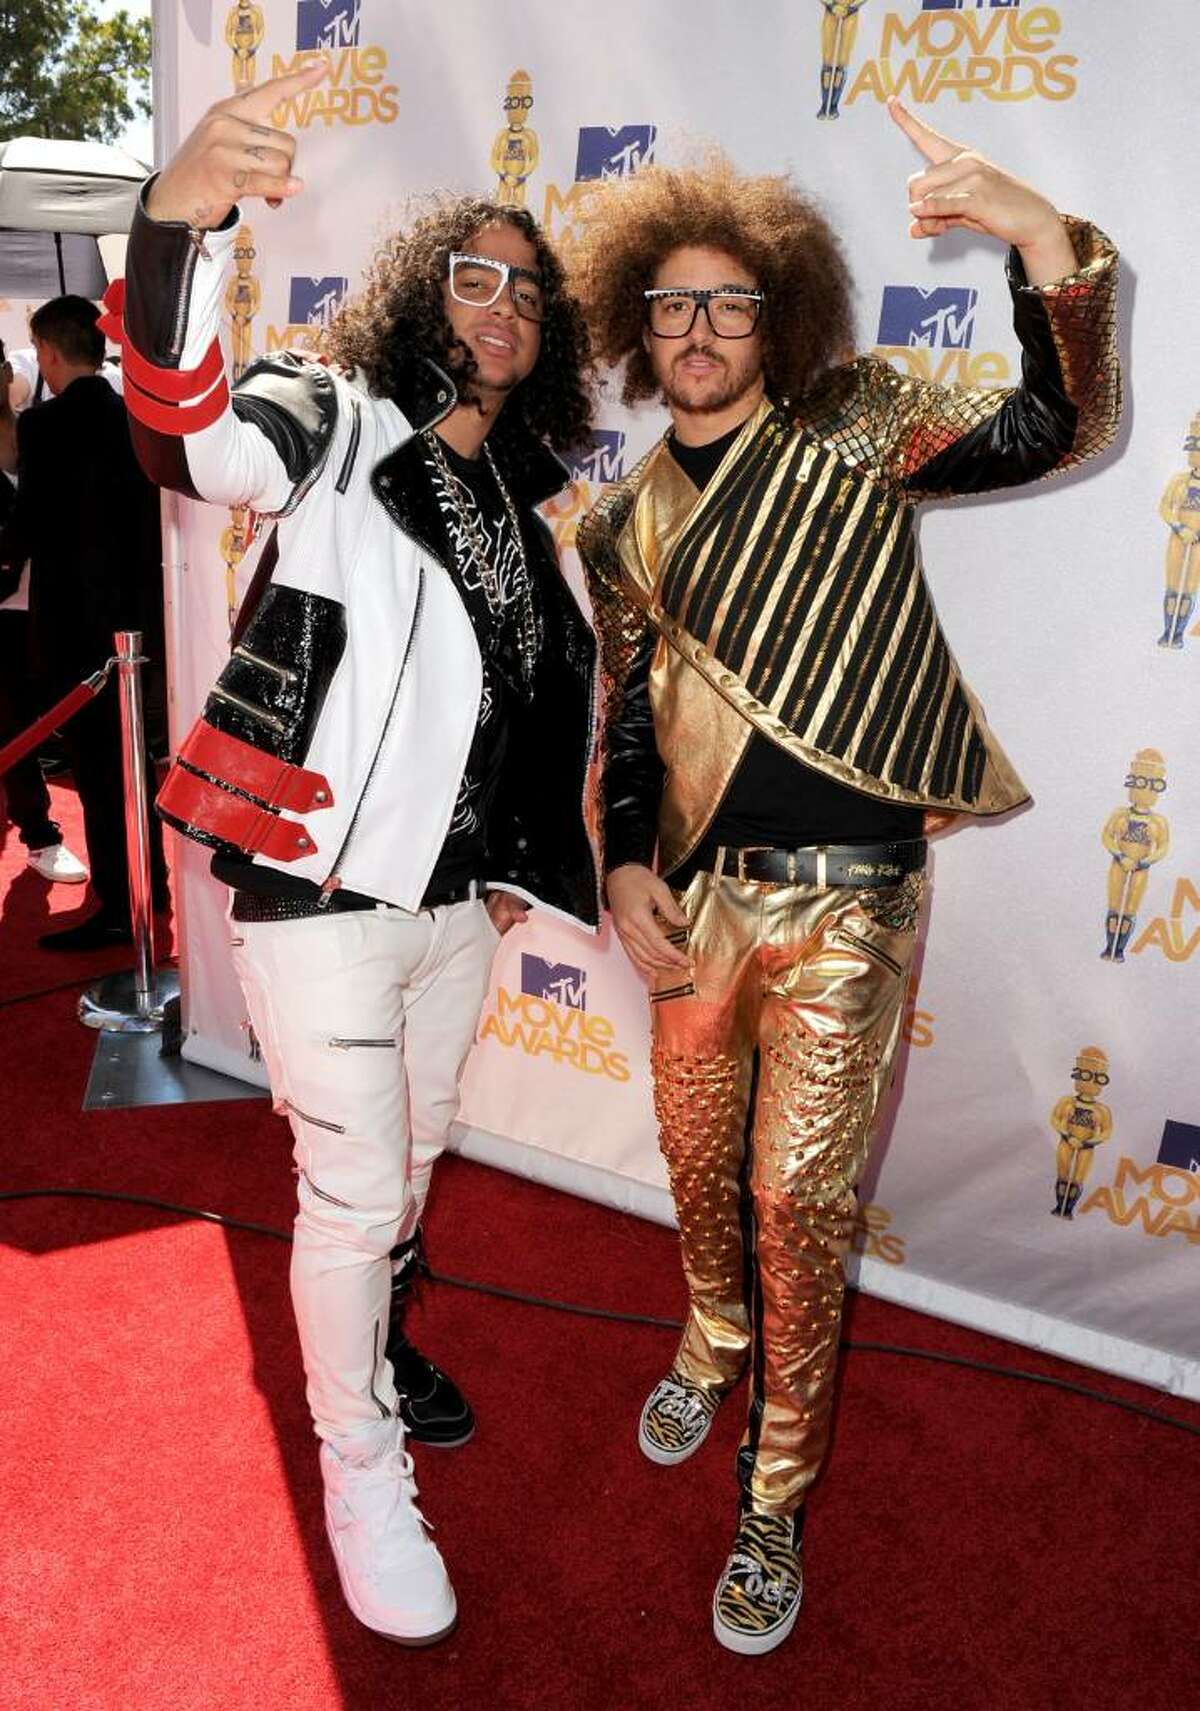 UNIVERSAL CITY, CA - JUNE 06: Sky Blu (L) and Redfoo of LMFAO arrive at the 2010 MTV Movie Awards held at the Gibson Amphitheatre at Universal Studios on June 6, 2010 in Universal City, California. (Photo by Kevin Winter/Getty Images) *** Local Caption *** Redfoo;Sky Blu